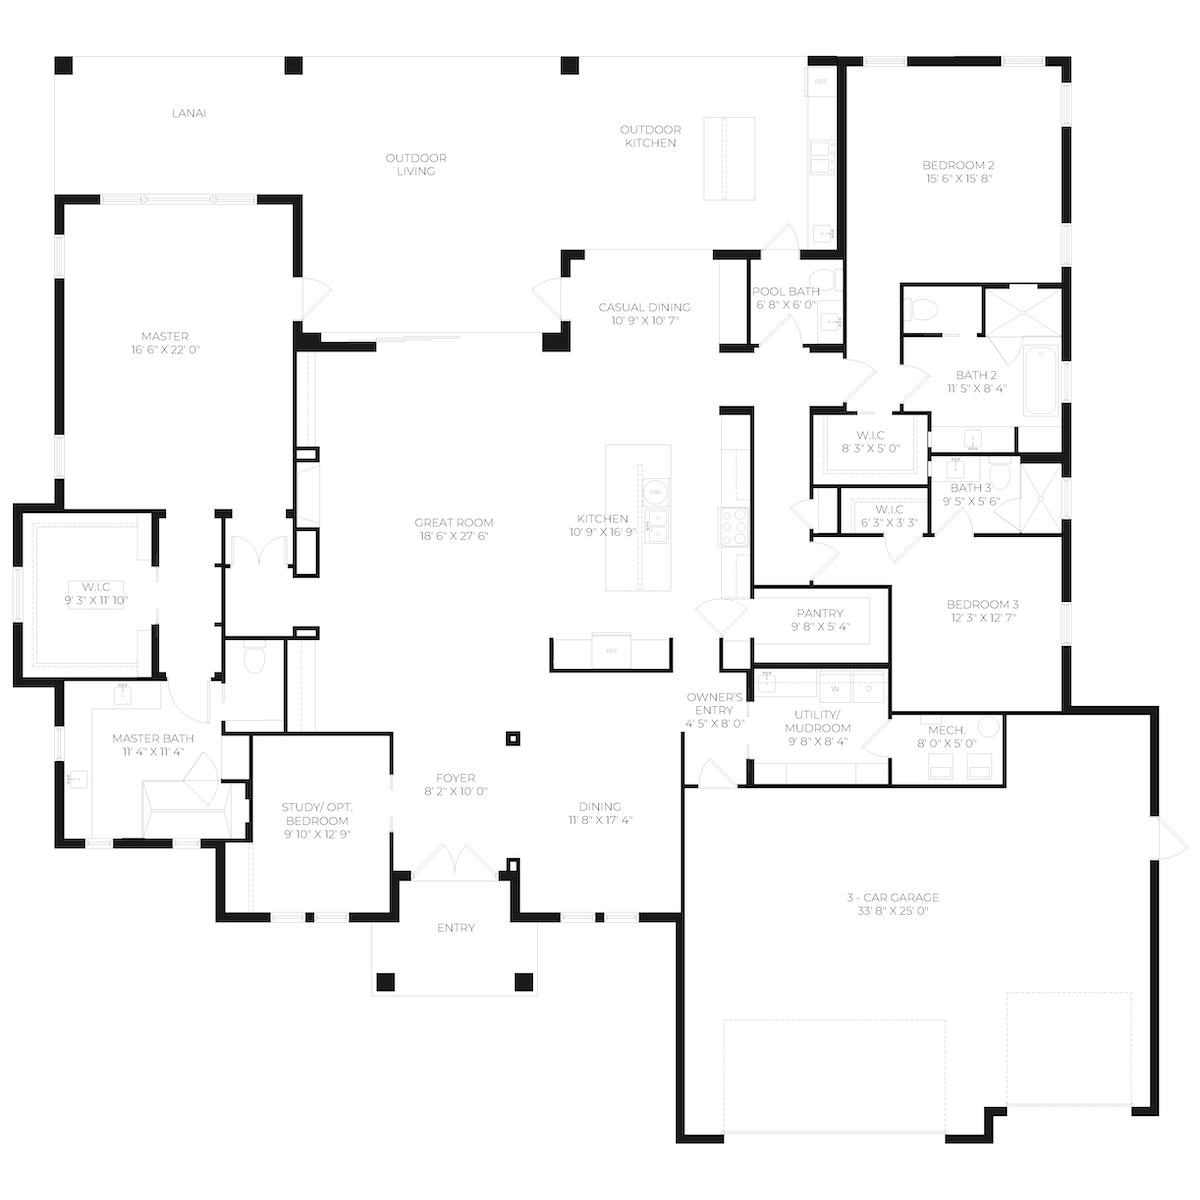 2D Black lines plan showing room labels and dimensions